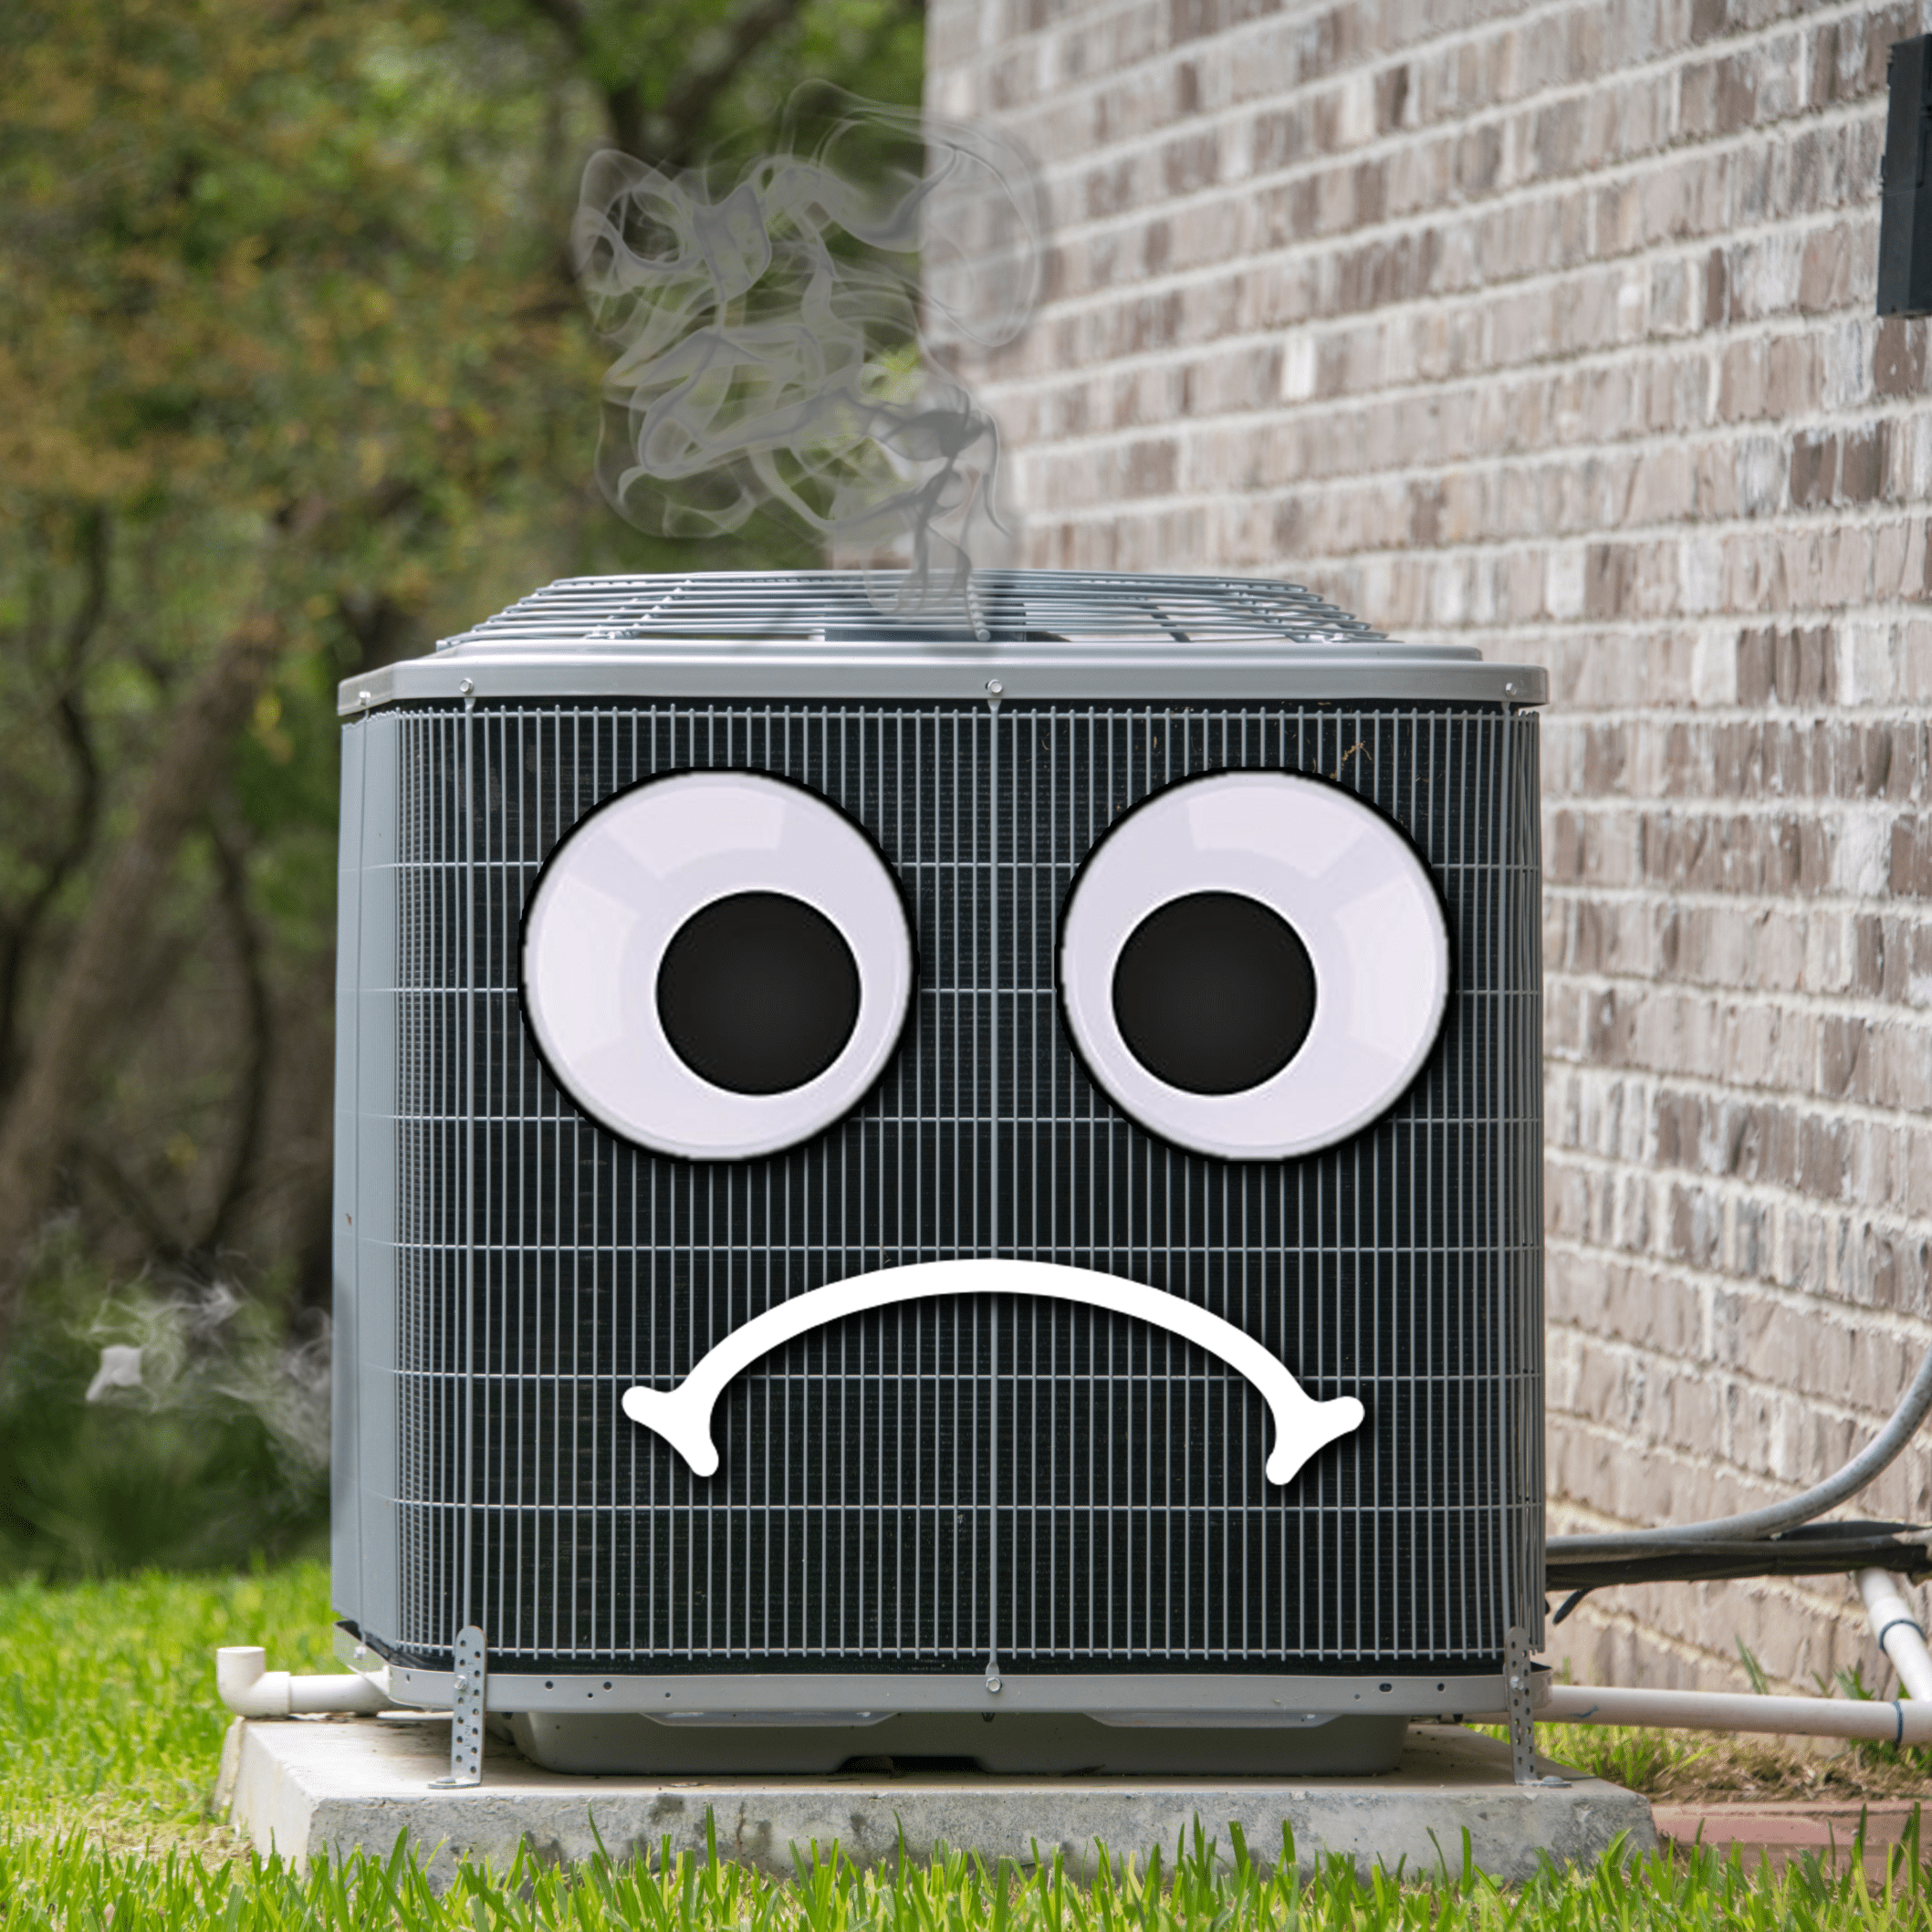 Frowning Air Conditioner.